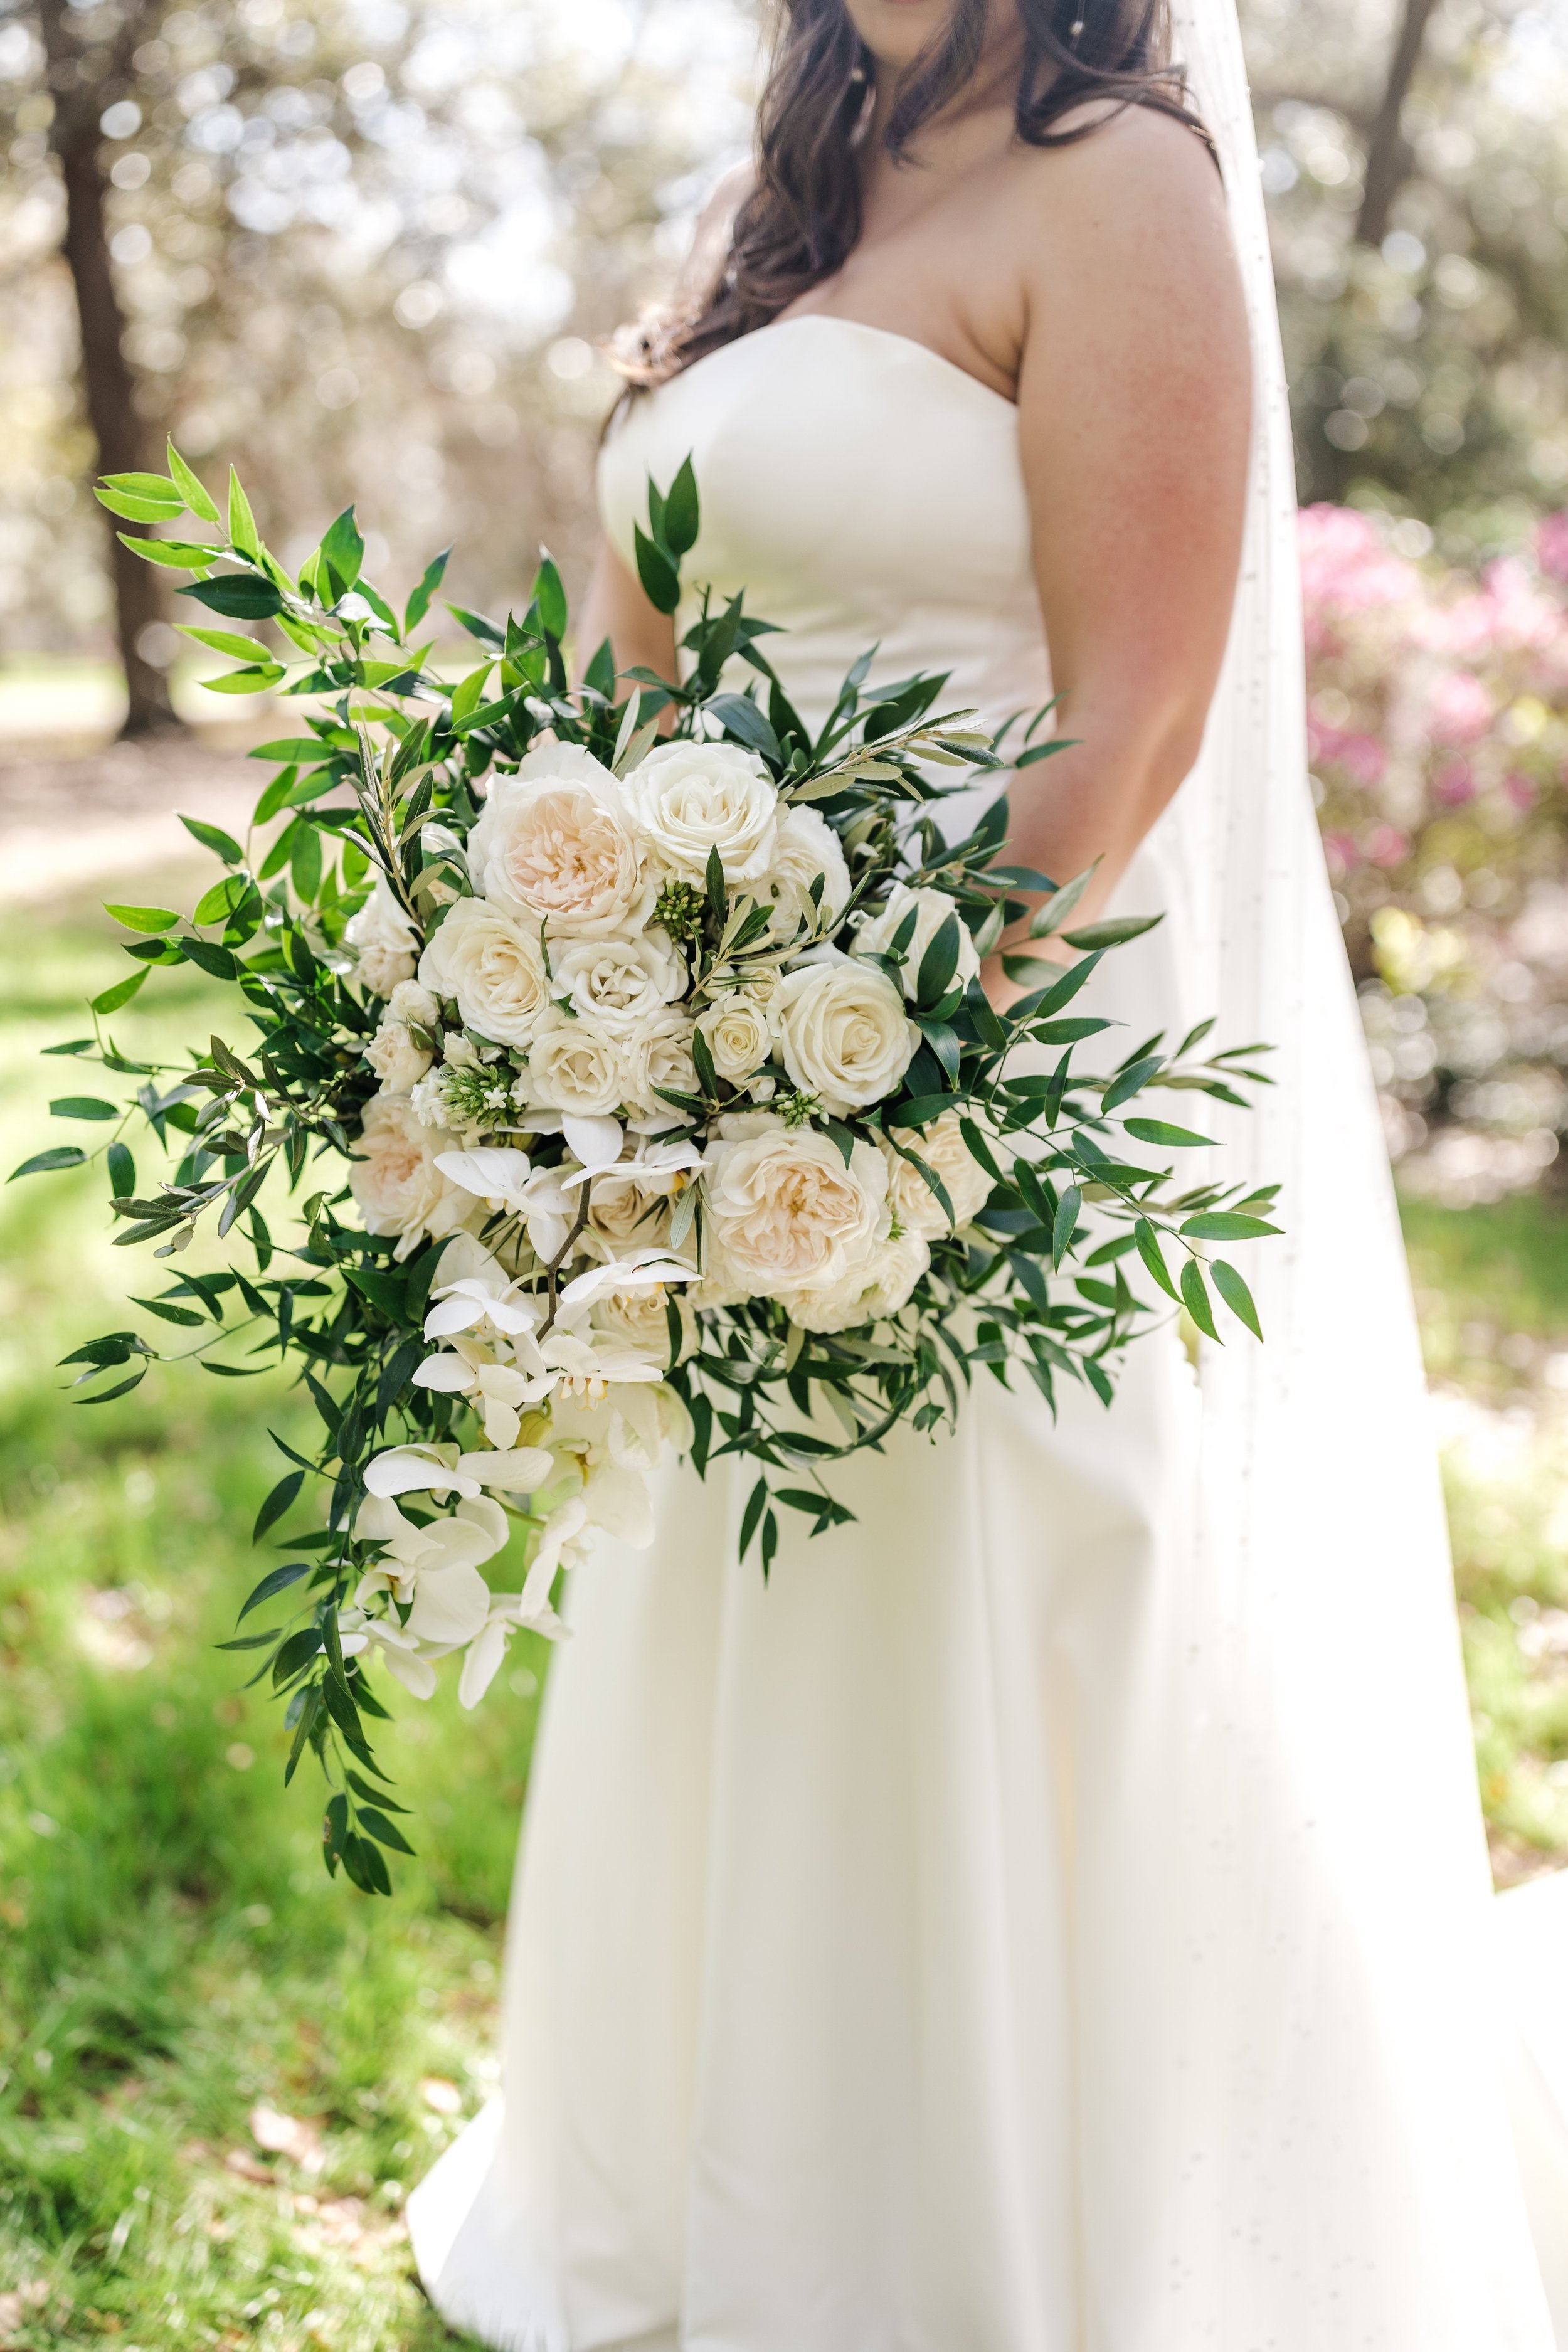 ivory-and-beau-wedding-and-florals-annelise-and-preston-wedding-blog-savannah-wedding-savannah-wedding-coordinator-savannah-florsit-wedding-florist-southern-wedding-forsyth-park-fountain-soho-south-savannah-wedding-gmp20199345-359.jpg